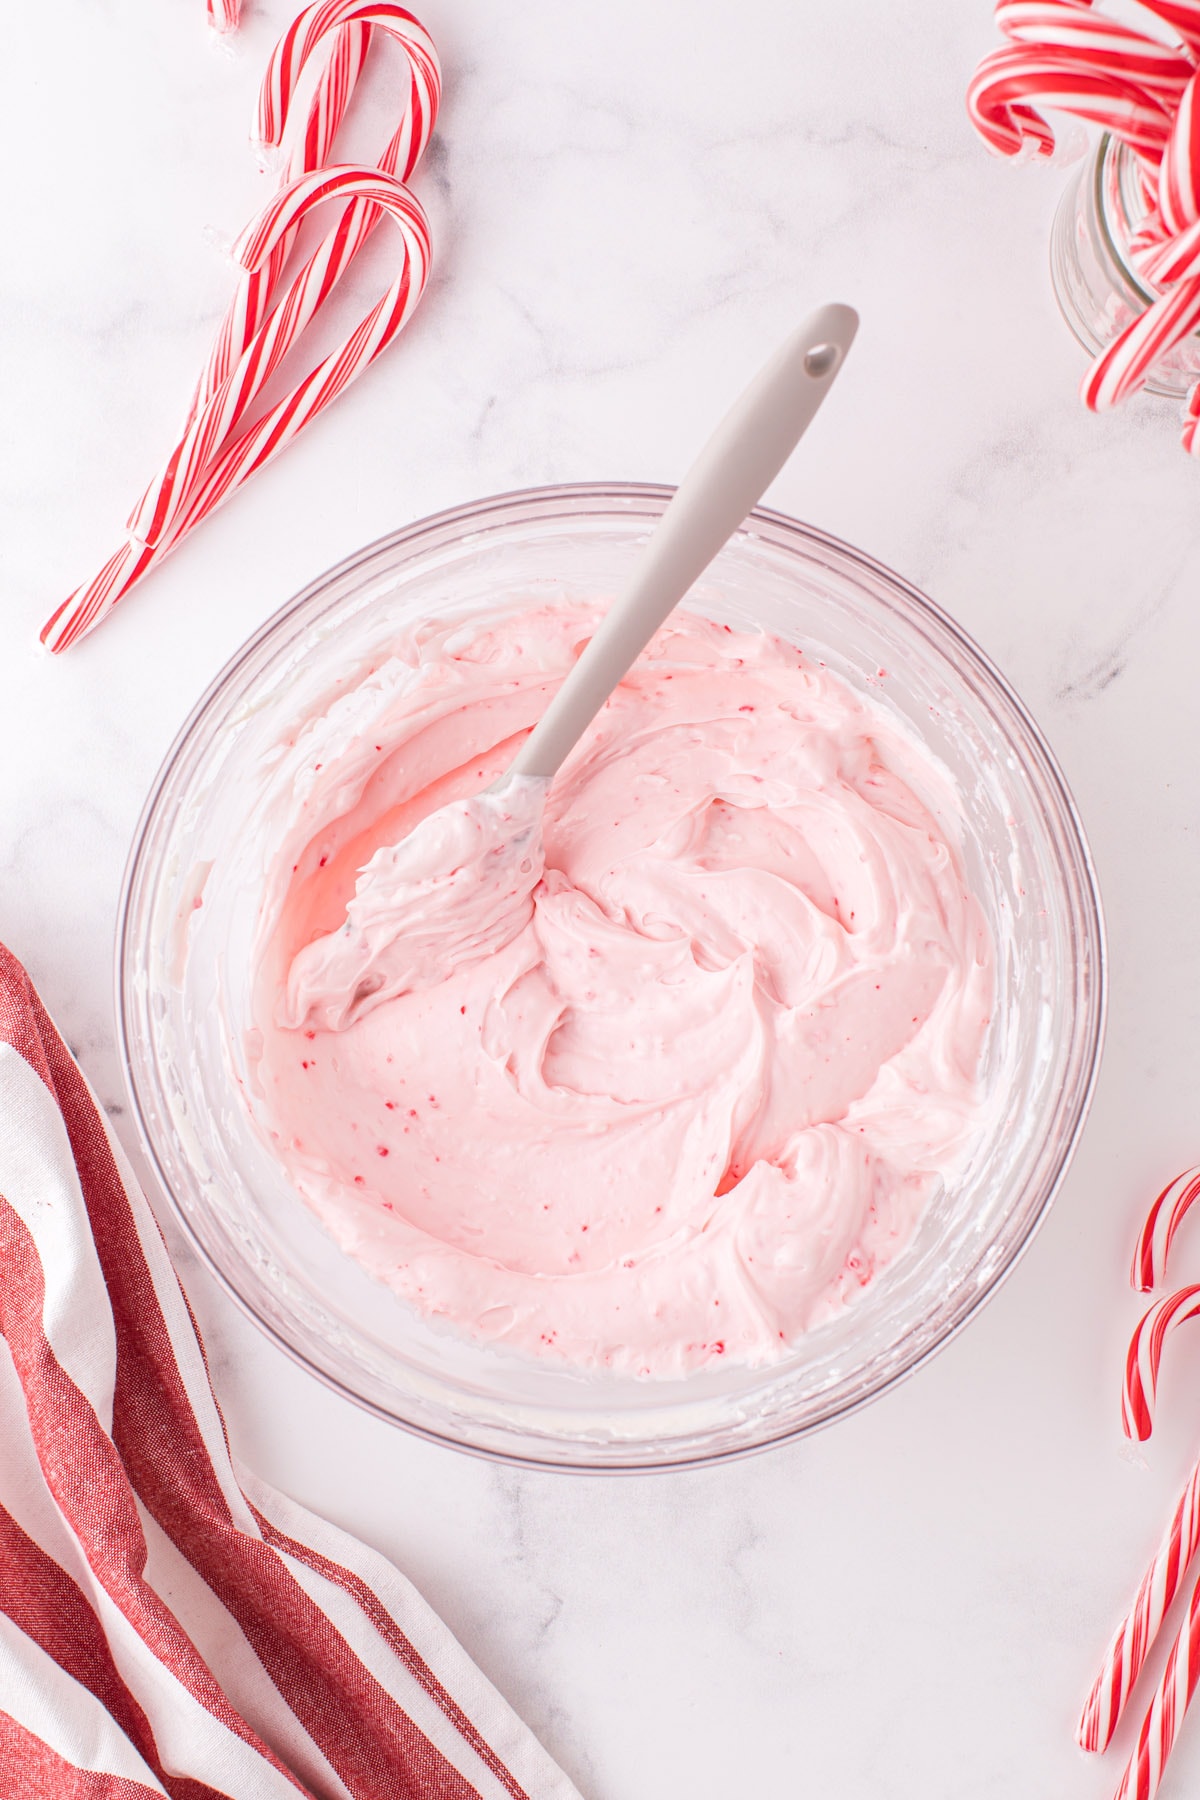 add crushed candy canes into the mixture